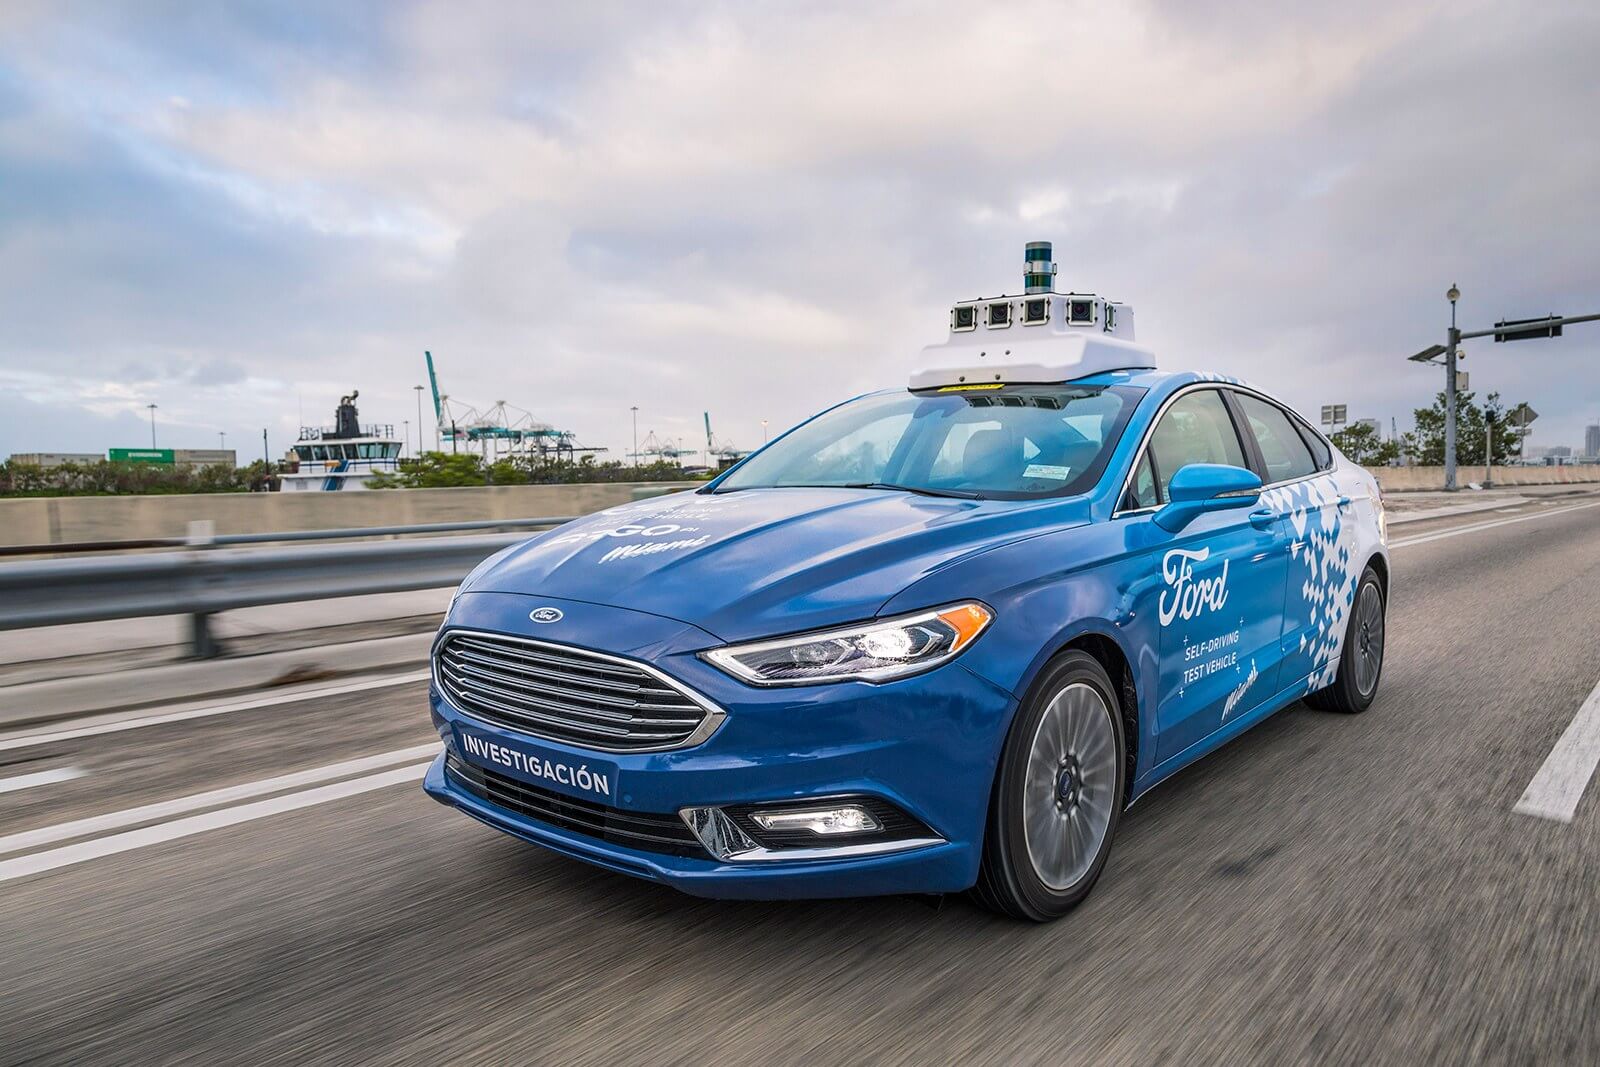 Ford announces plans to test self-driving cars in Washington, DC